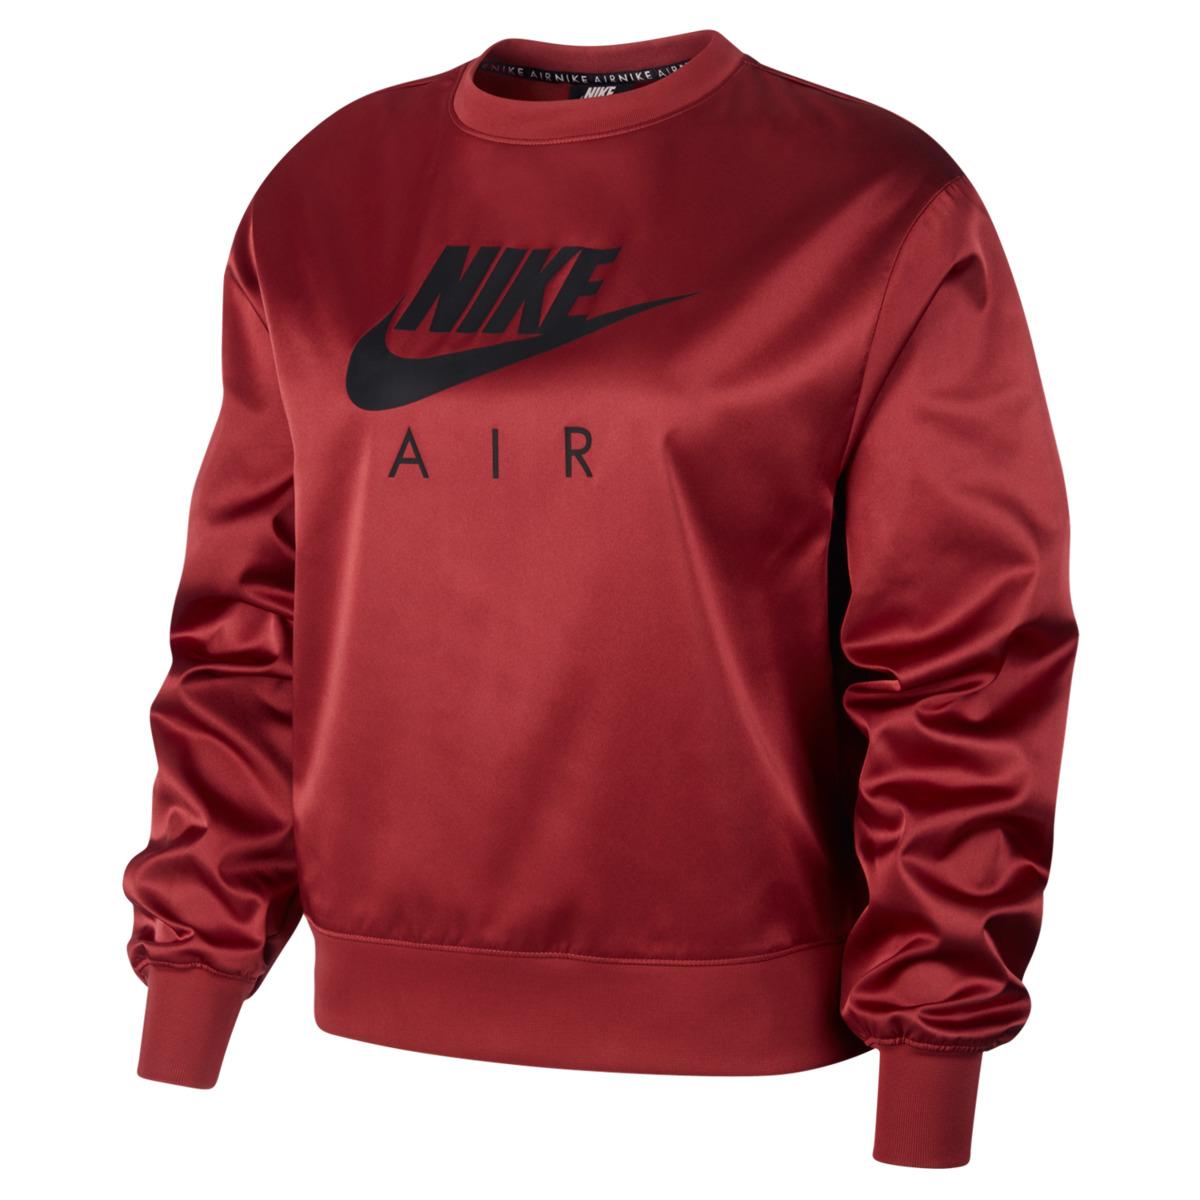 nike air red sweater cheap buy online